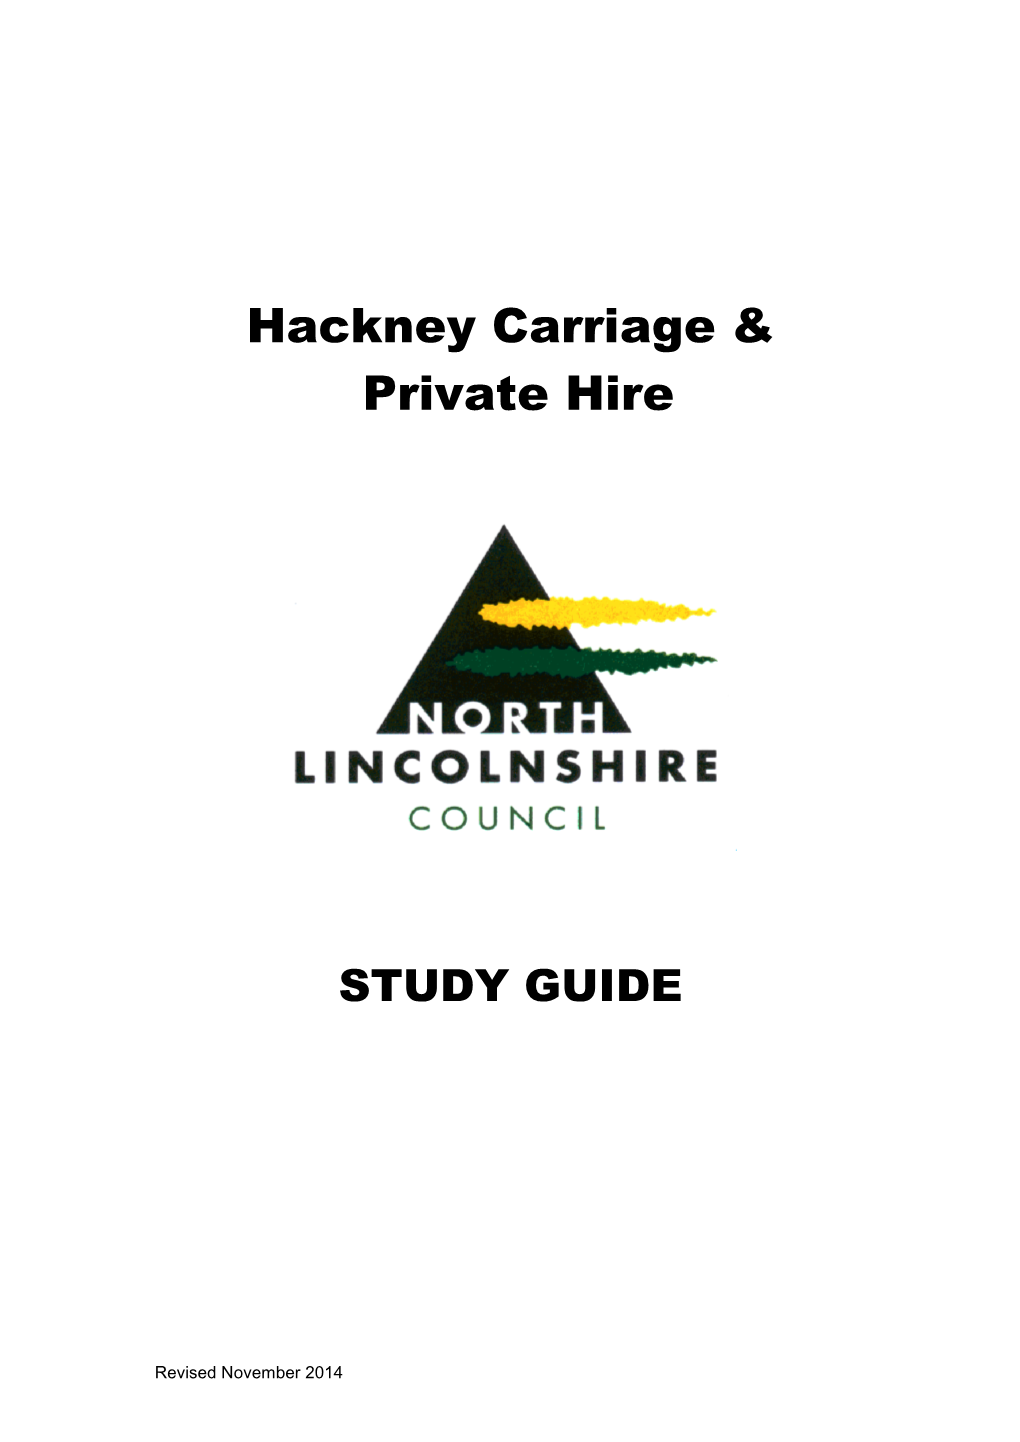 Hackney Carriage & Private Hire